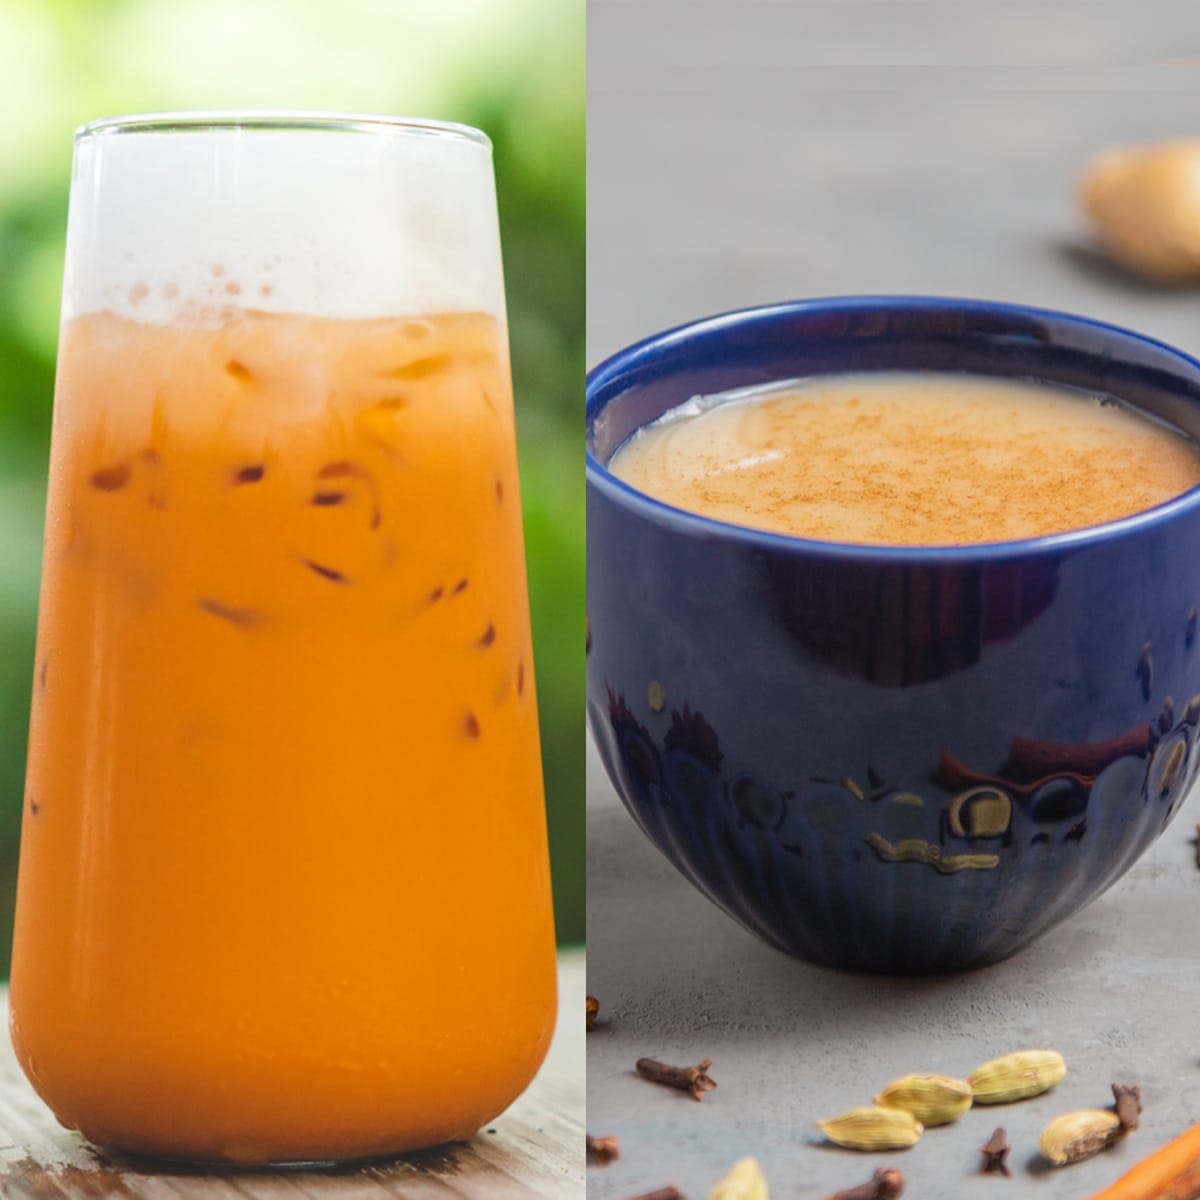 There is certainly no shortage of tea options available, but when choosing between Thai tea and chai tea, which should you choose? Both are flavorful and aromatic teas, but each has a unique flavor profile and set of benefits.